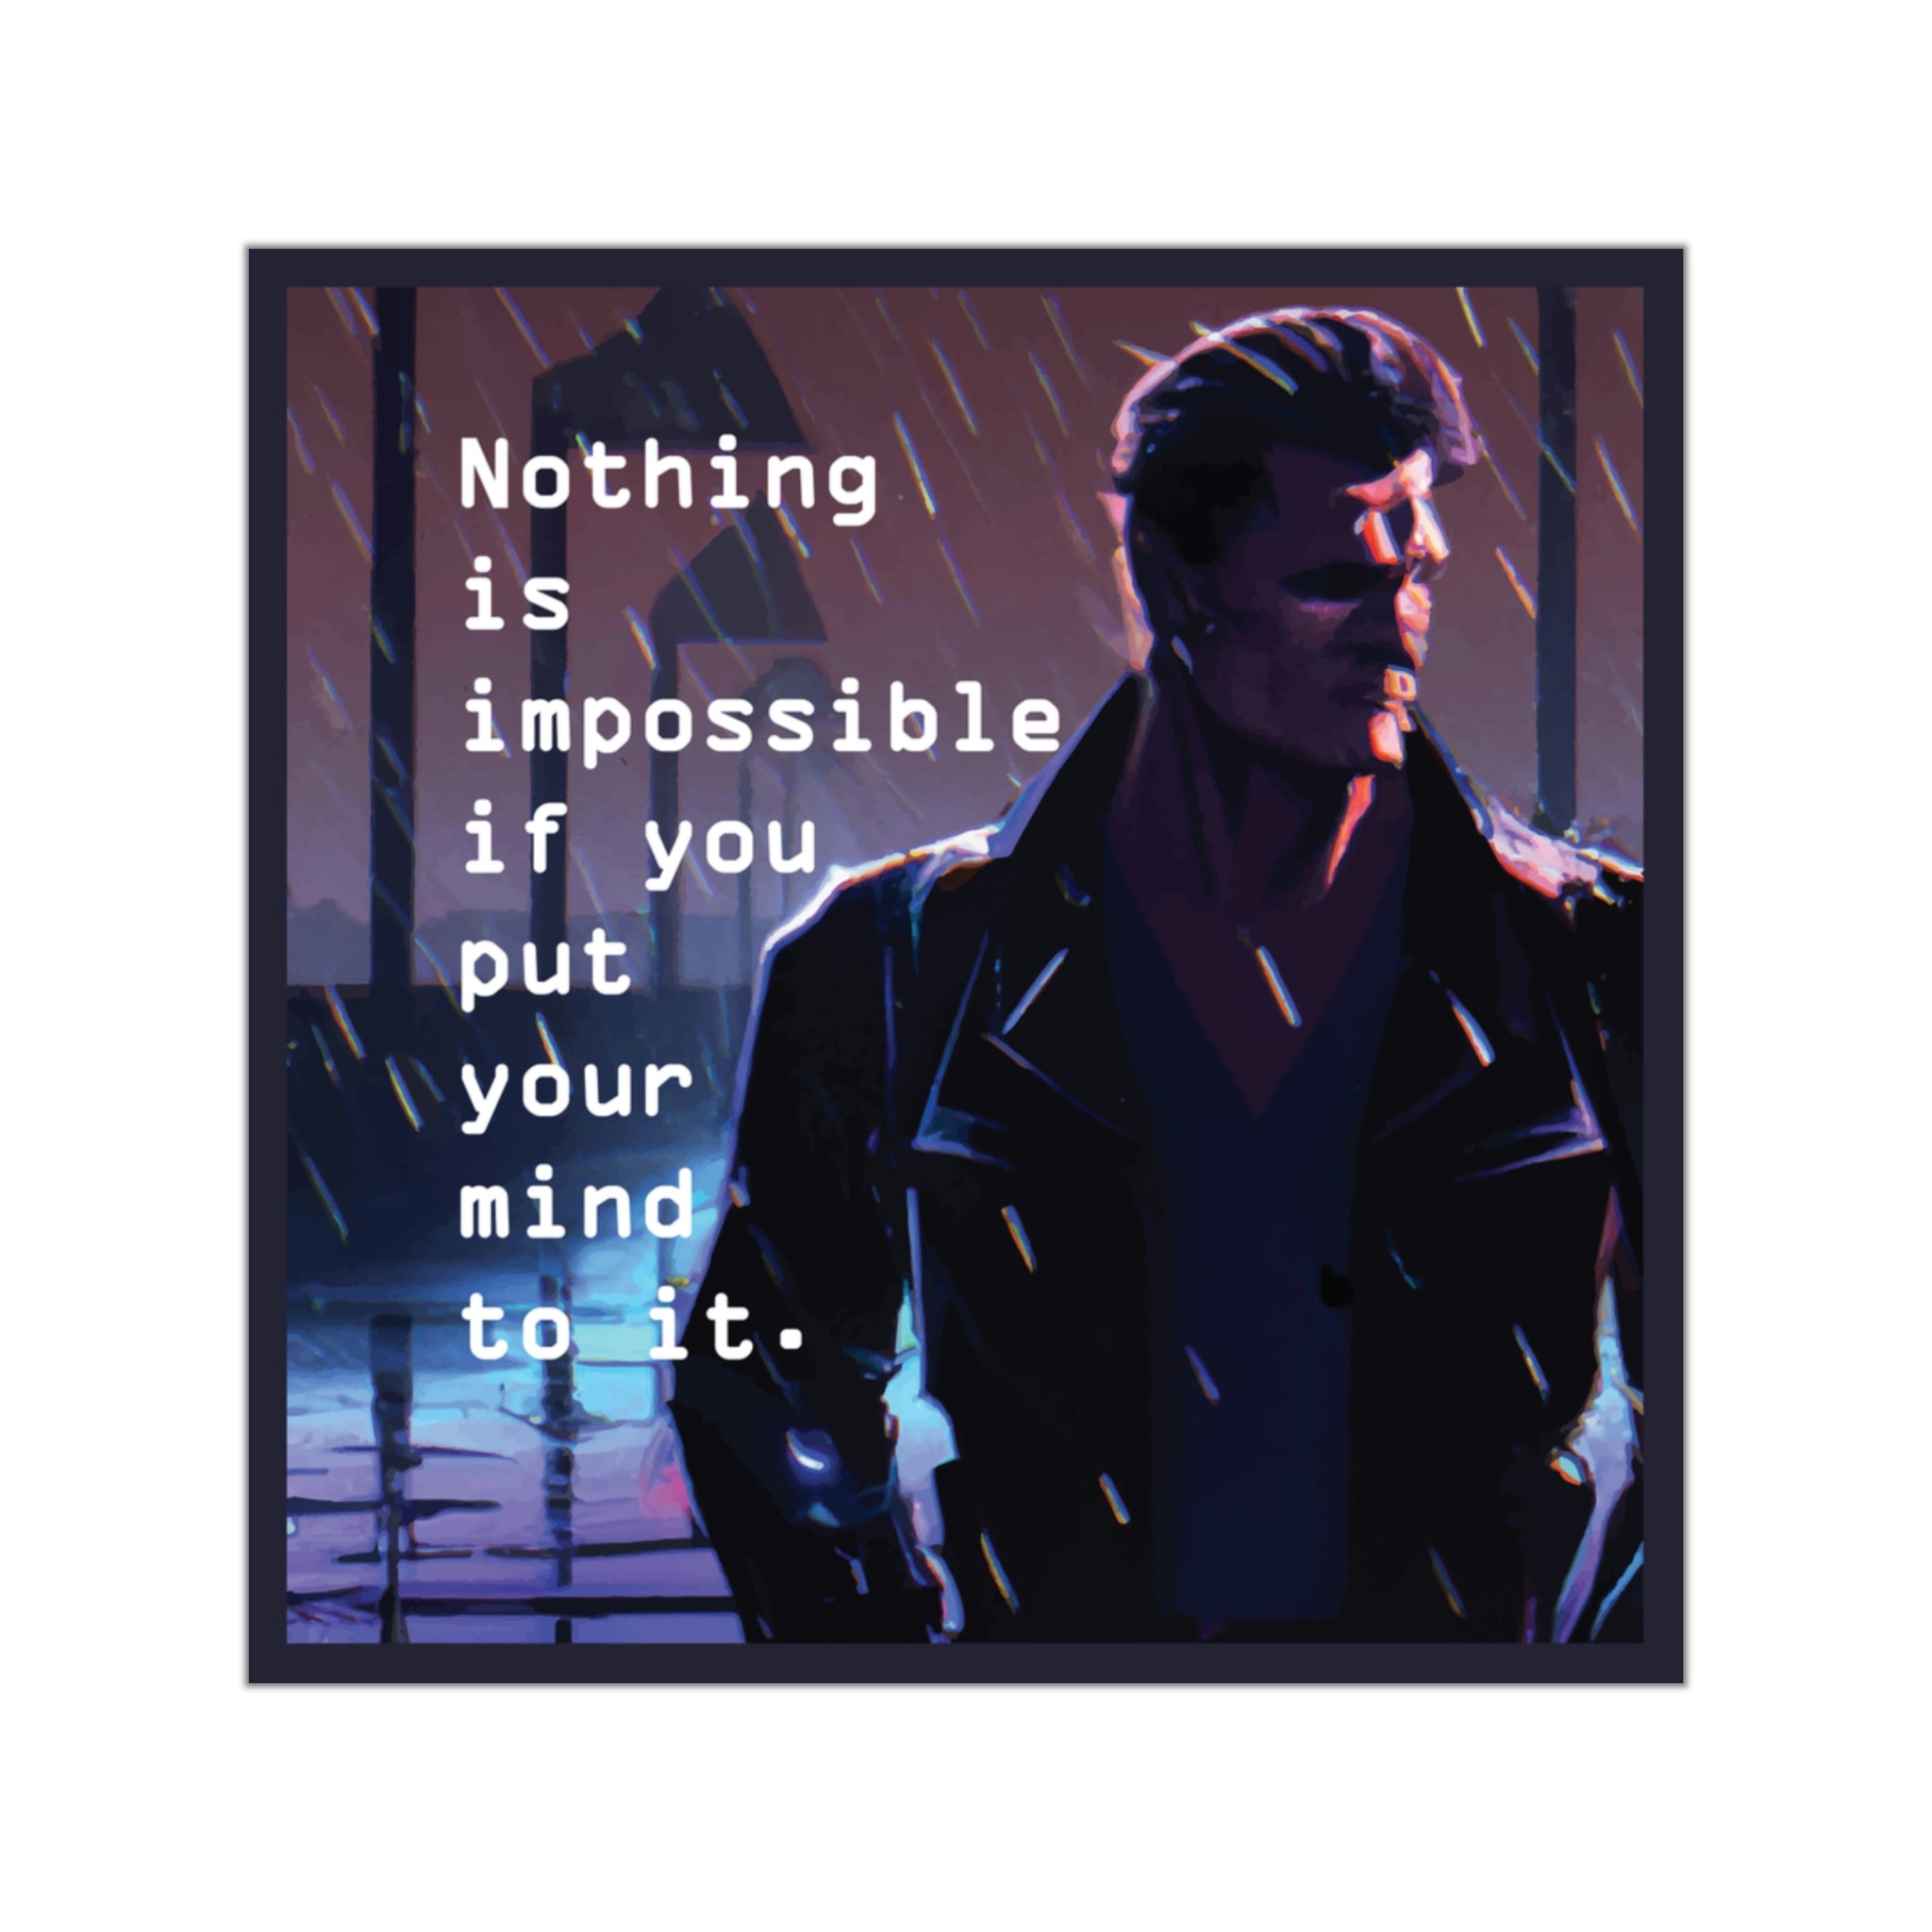 Nothing is Impossible - Motivational Vinyl Sticker for Inspiration